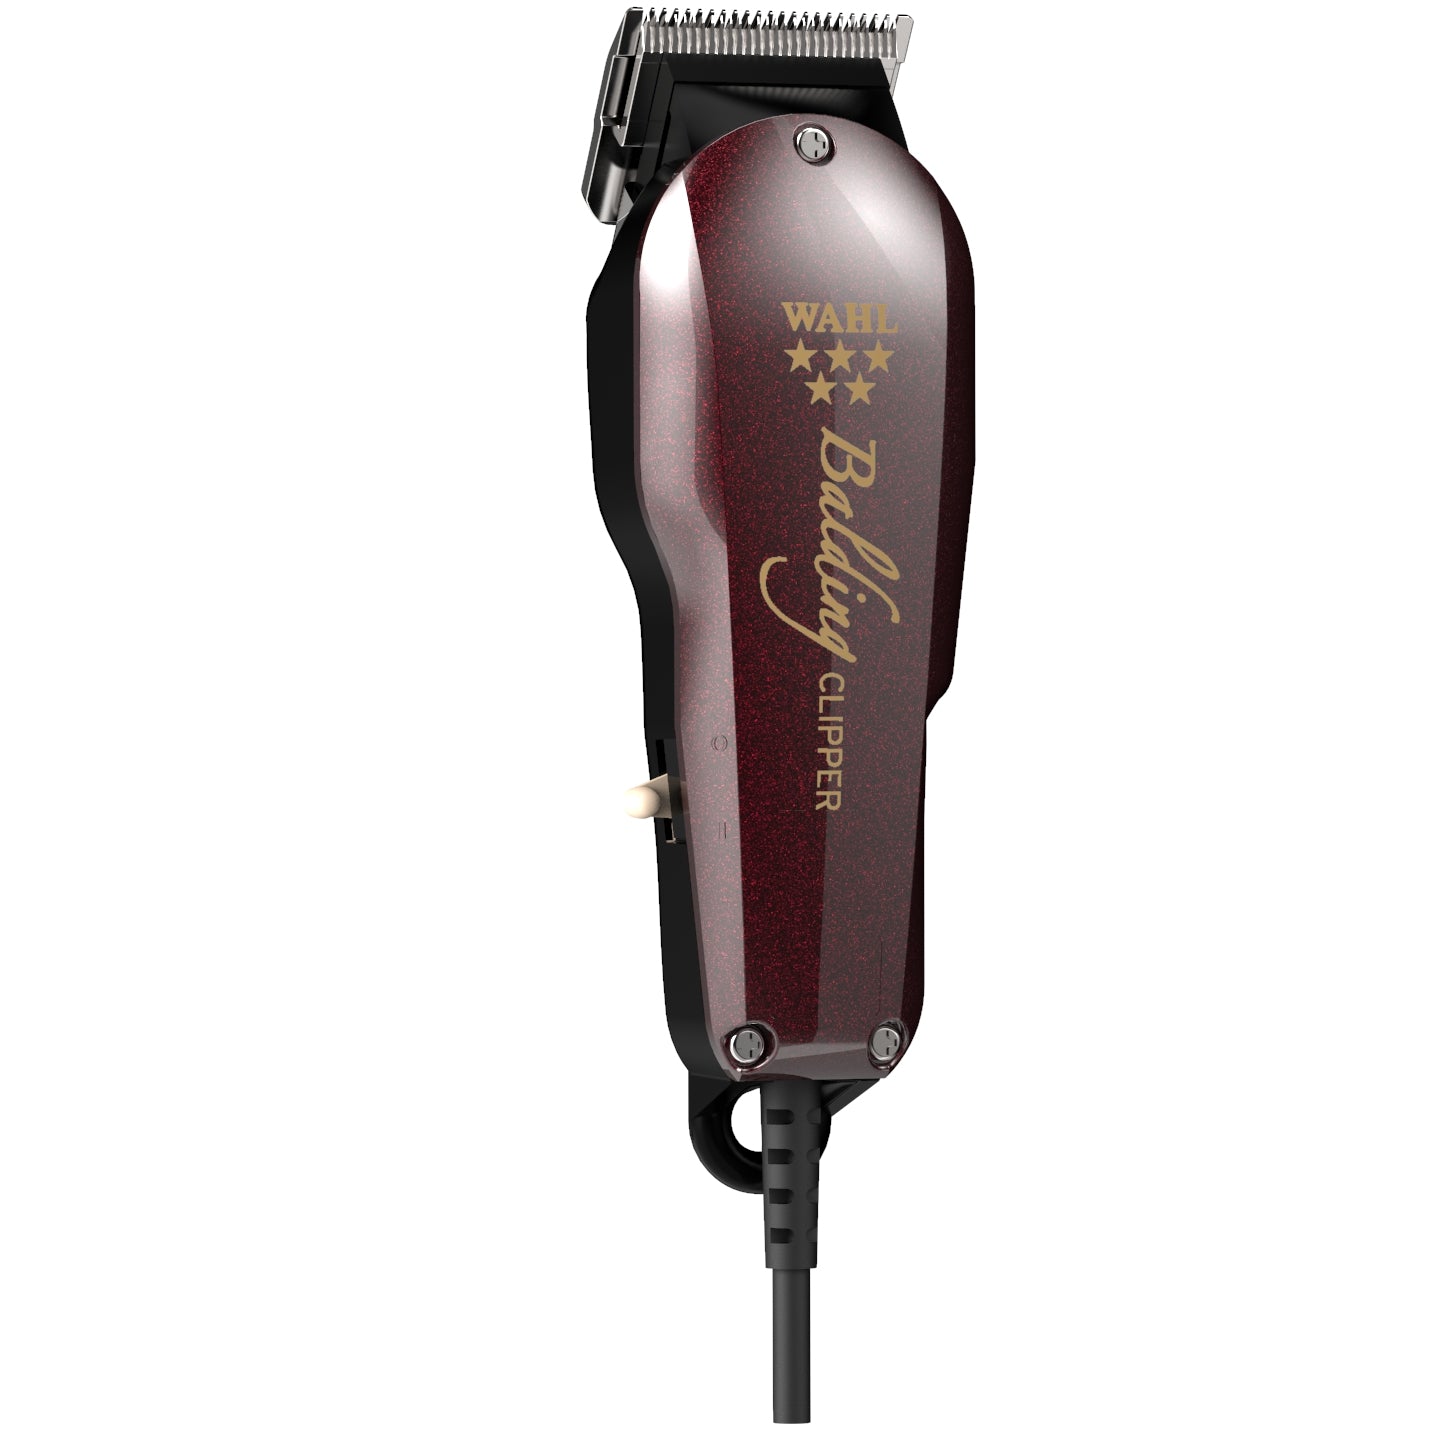 Wahl Balding Clipper - Ultimate Hair and Beauty